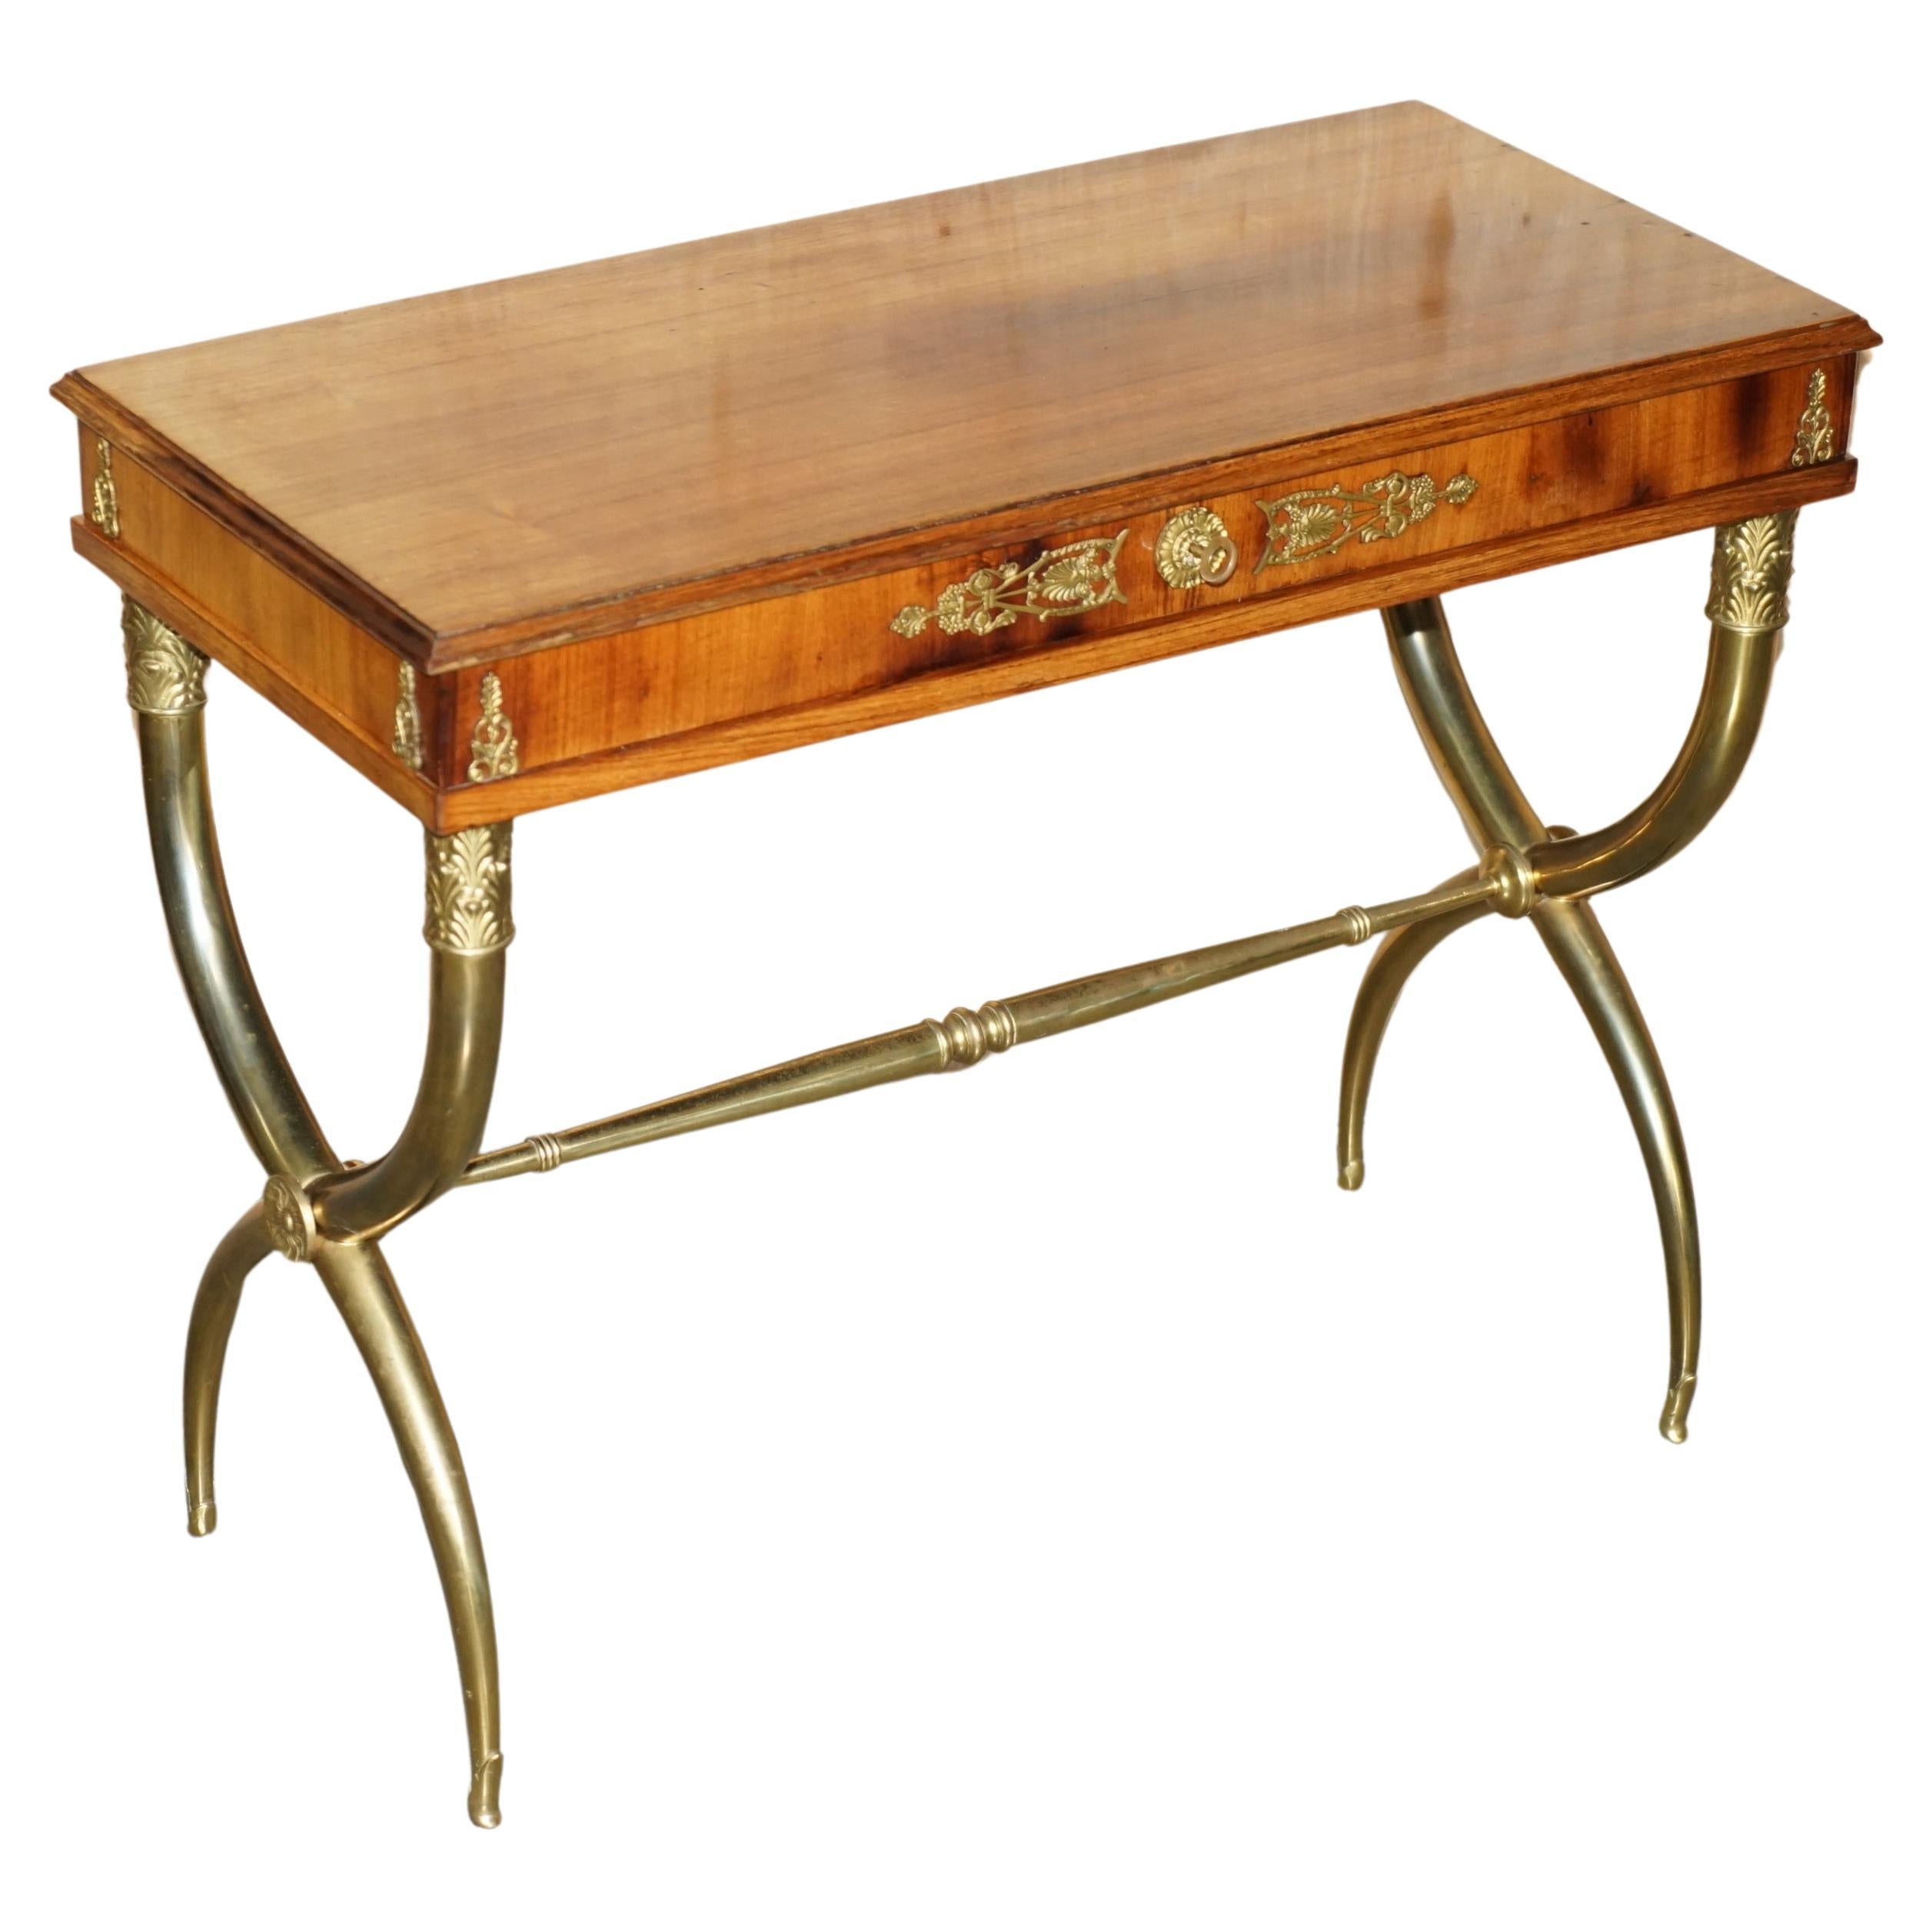 STUNNING REGENCY STYLE NEOCLASSICAL BRASS & WALNUT WRiTING TABLE DESK CIRCA 1920 For Sale